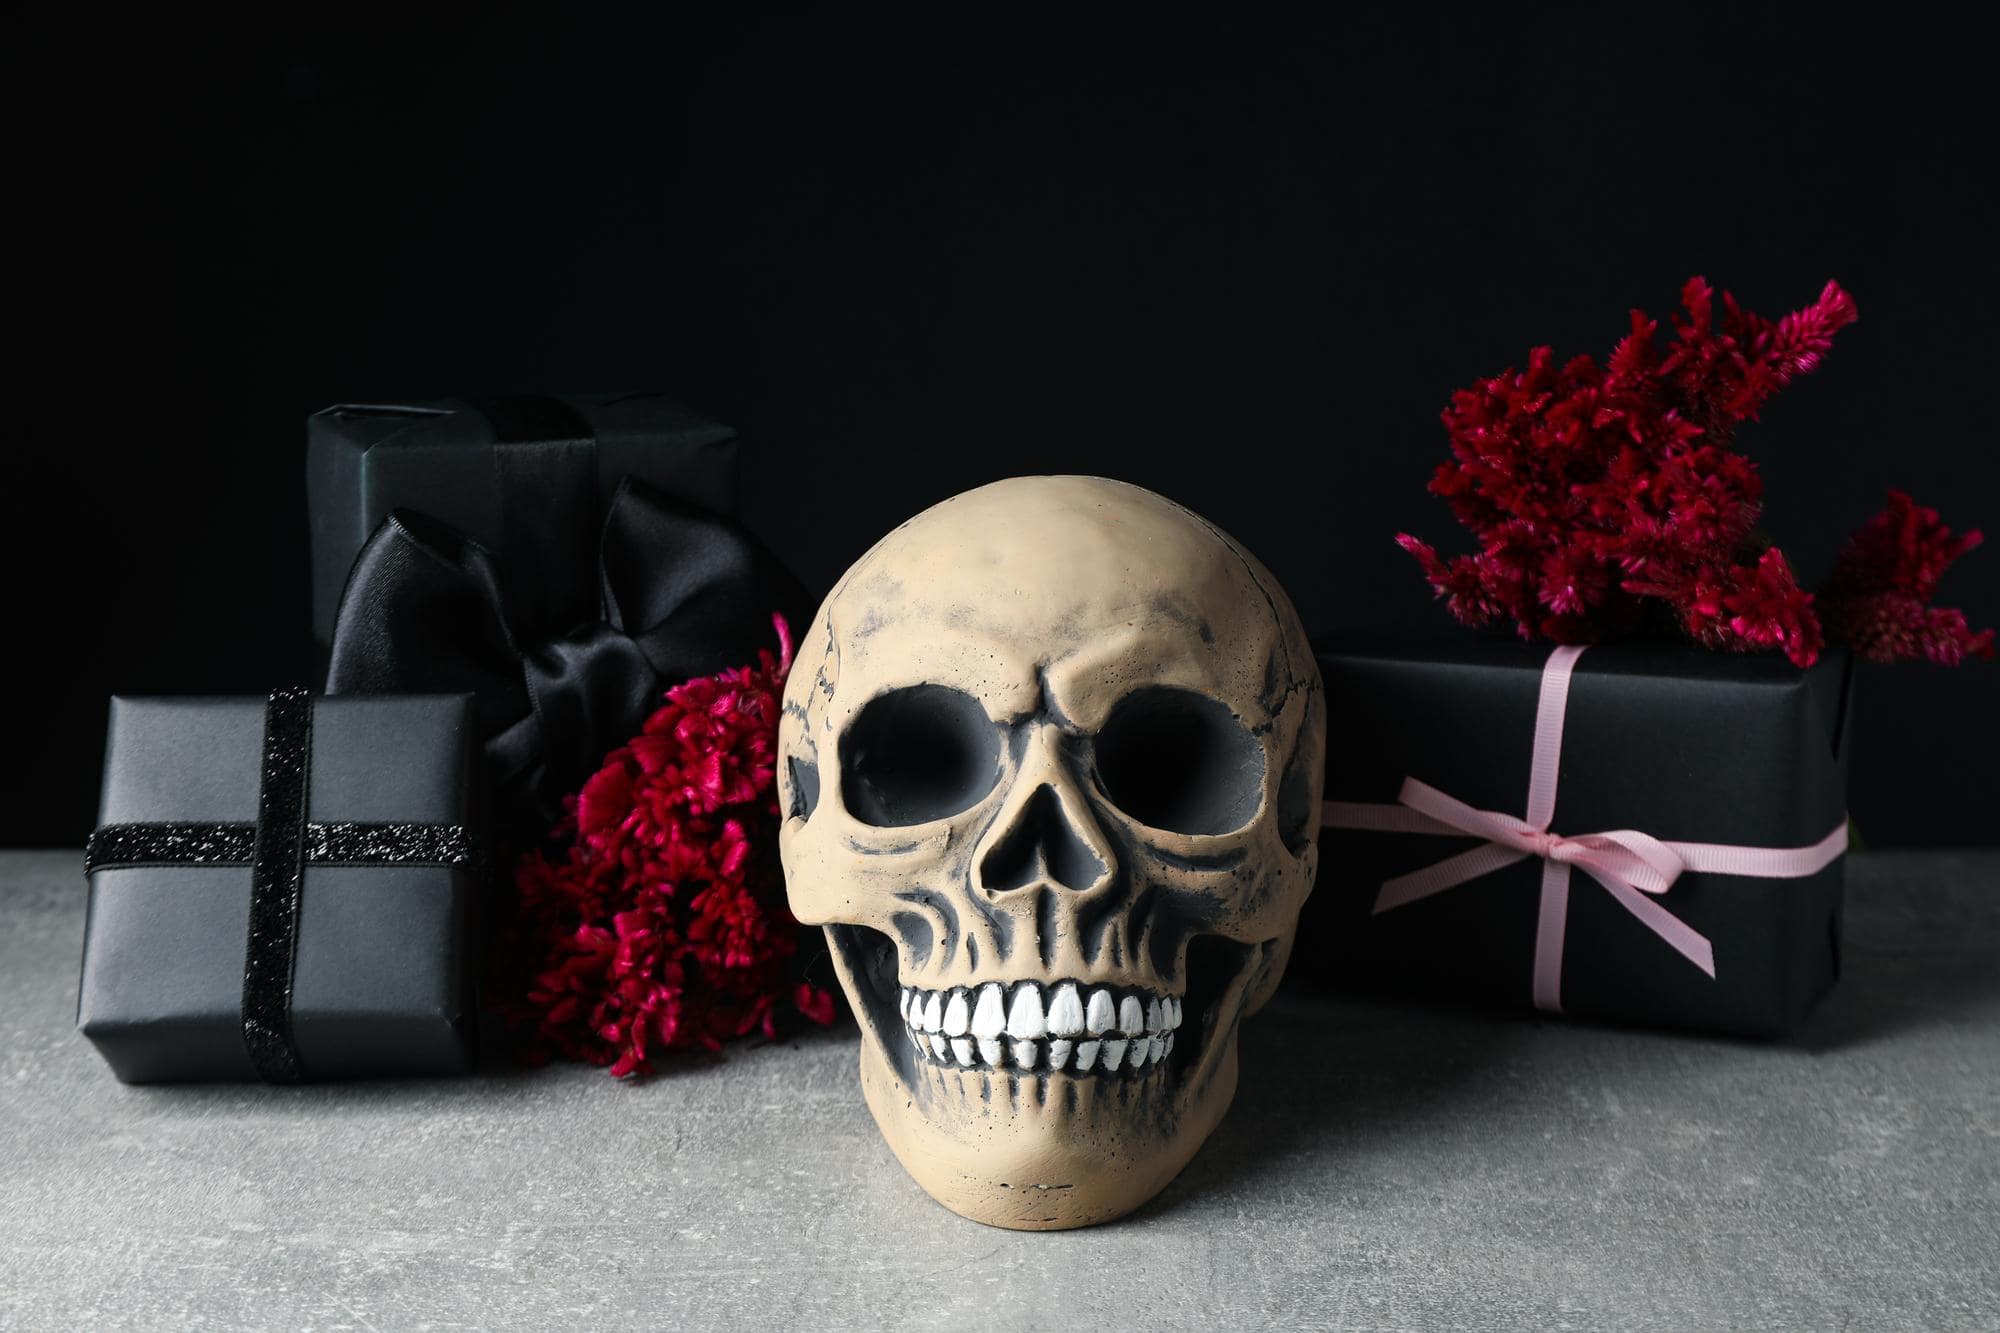 55+ Gifts for Skull Lovers From Gothic to Glamorous